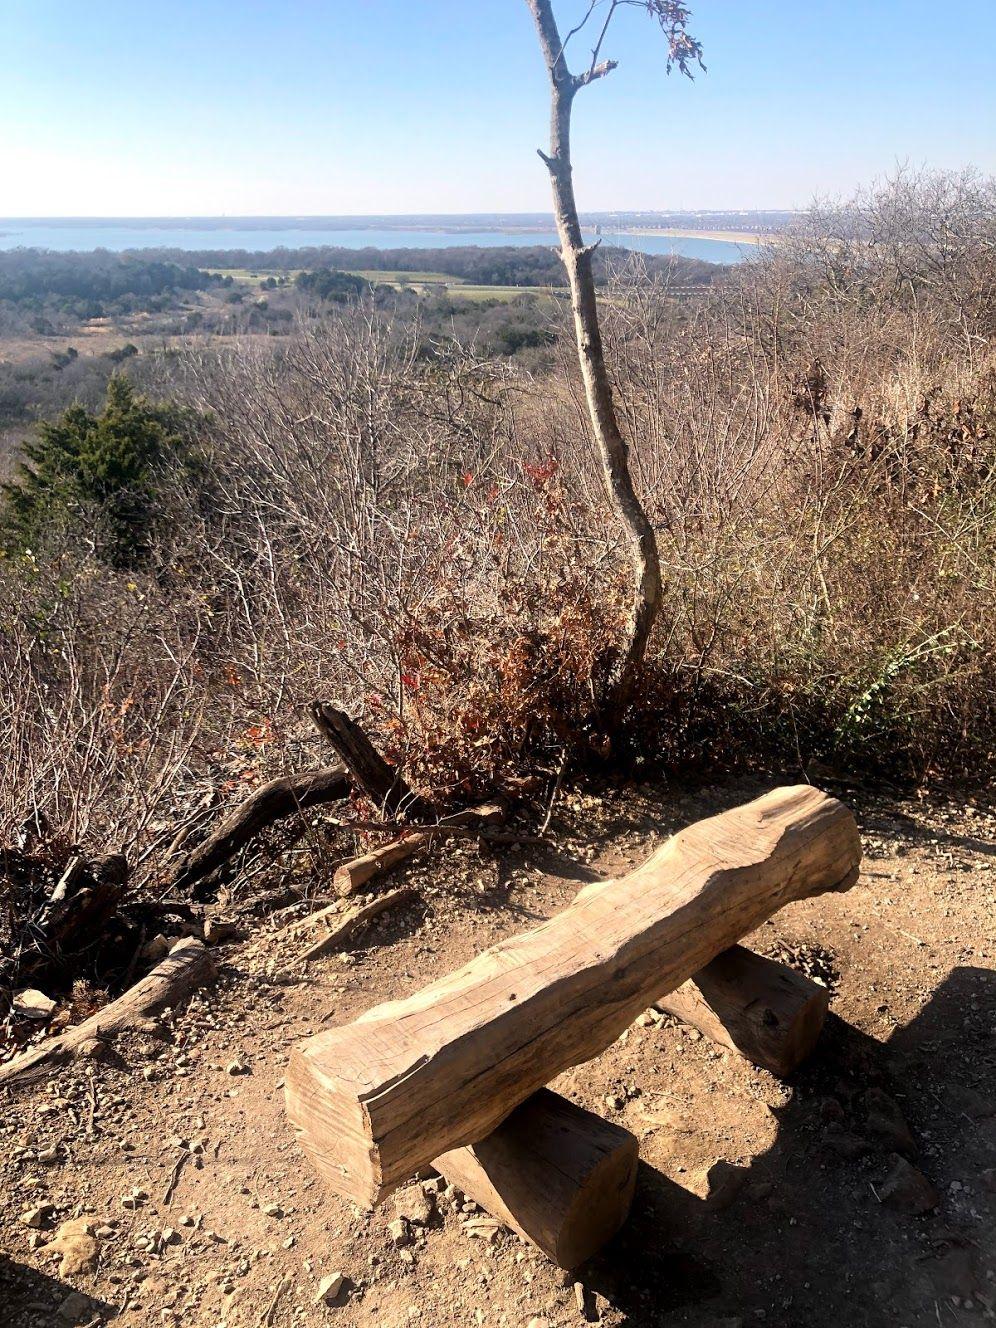 A bench next to an overlook with a lake in the distance.